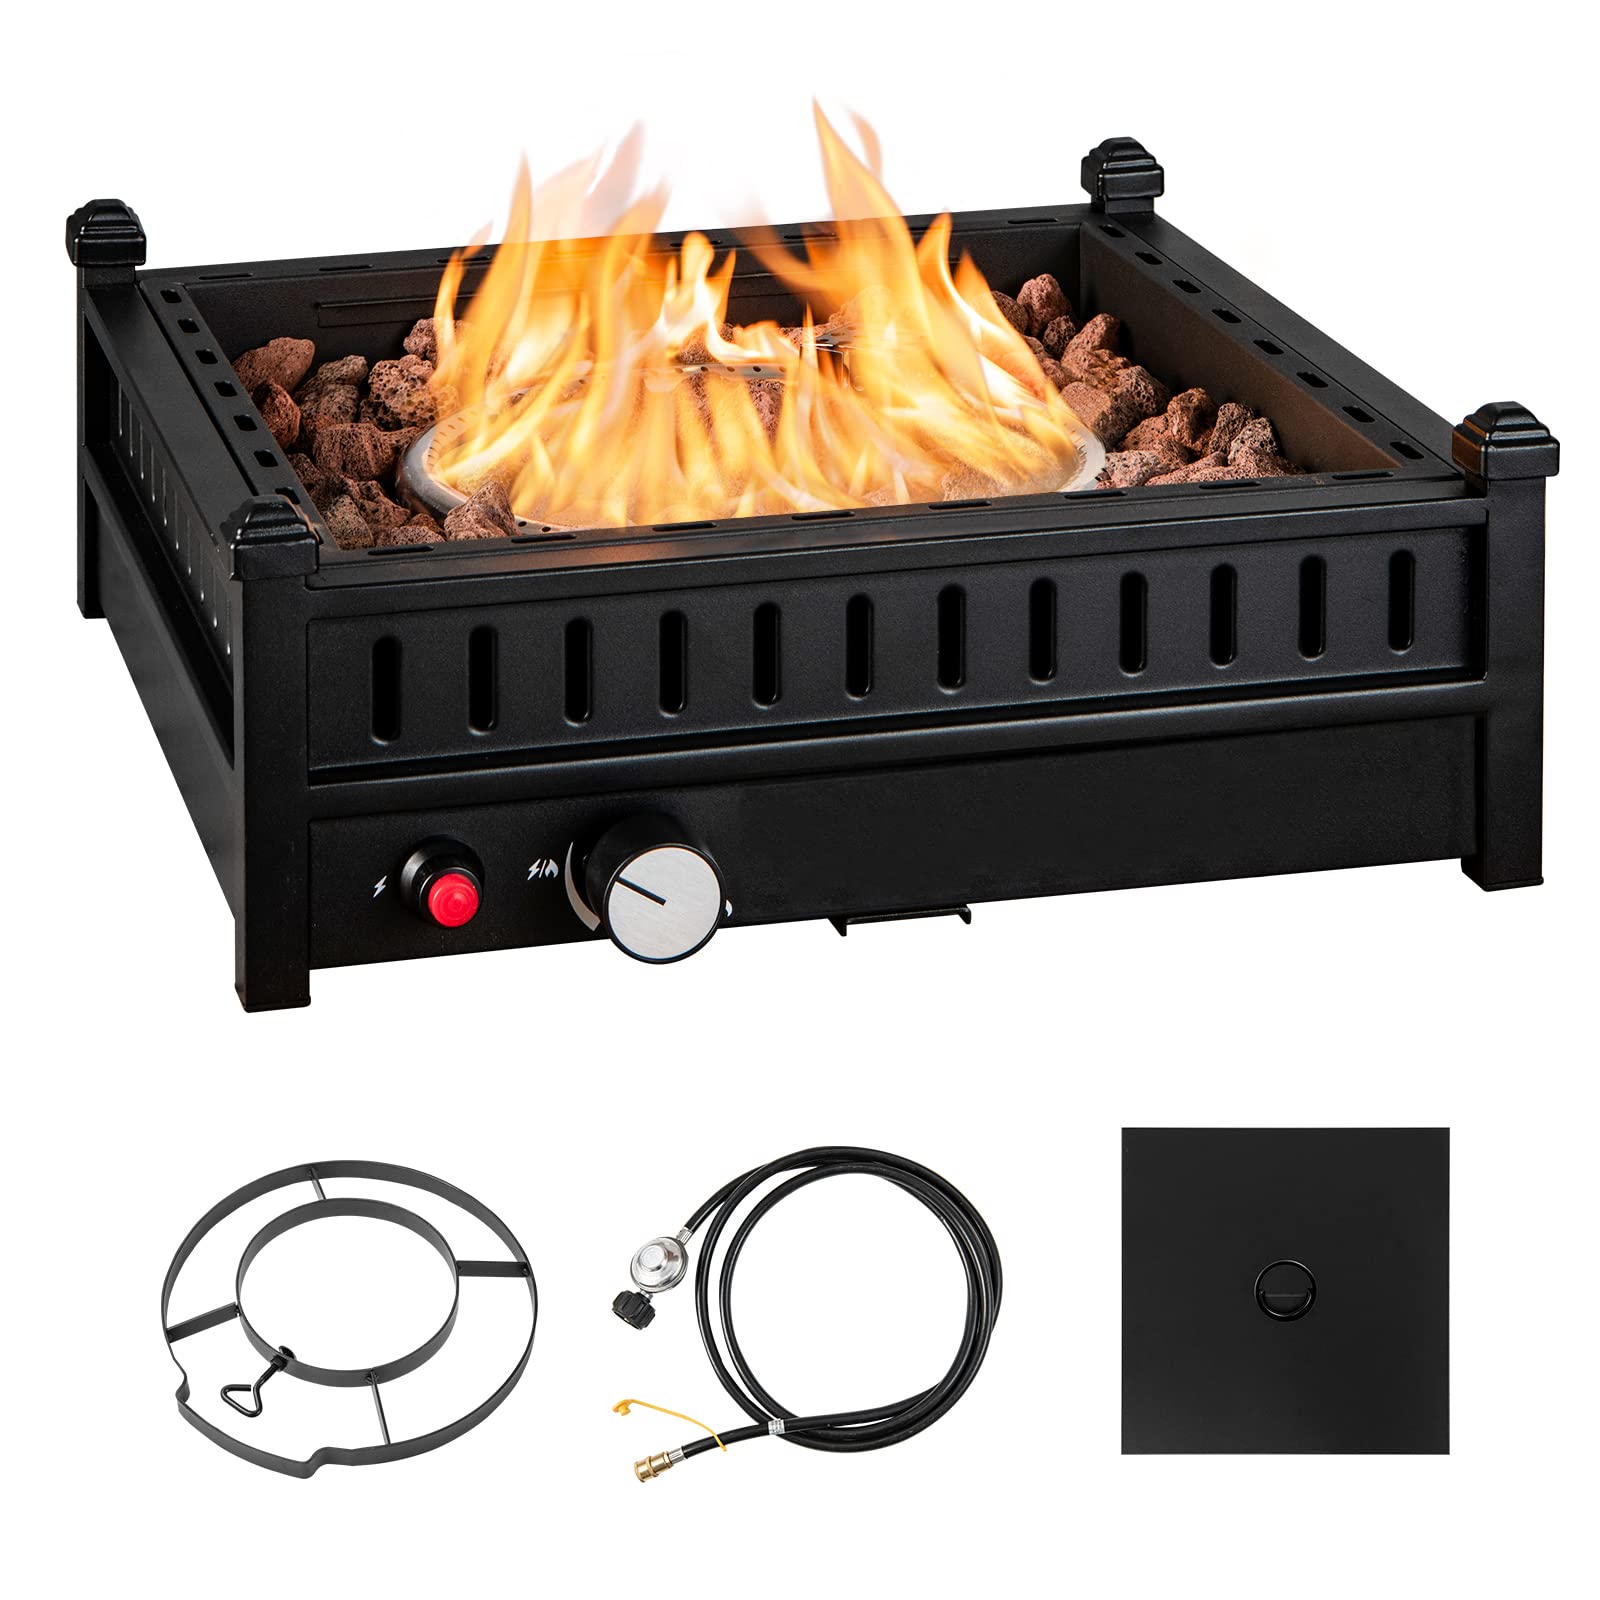 Giantex Outdoor Tabletop Fire Pit - 16.5 Inch Propane Fire Pit